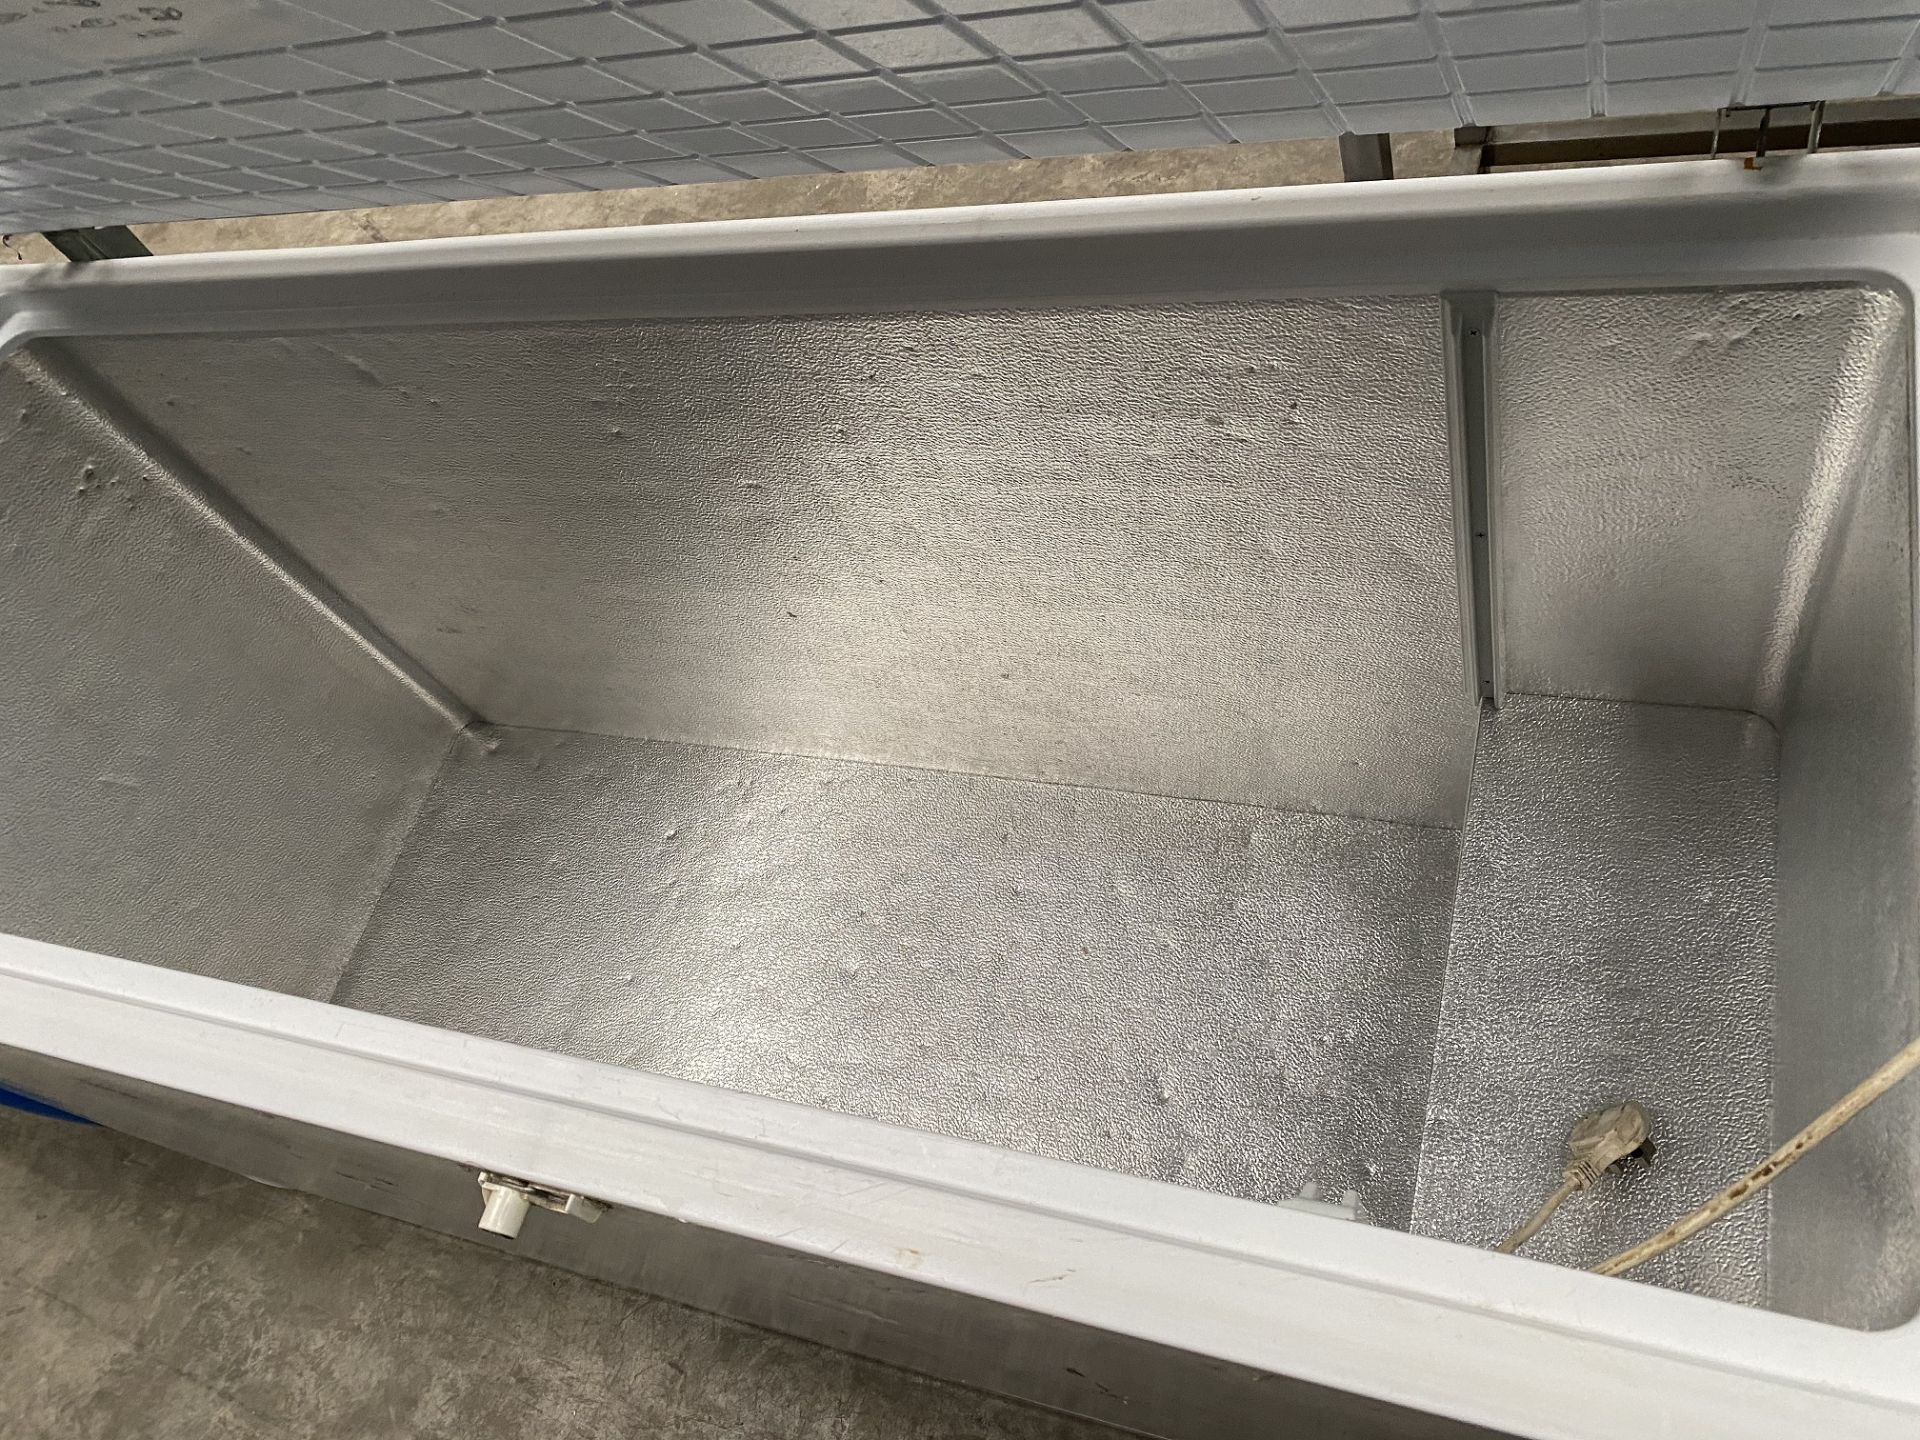 Fosters Chest Freezer Stainless Steel Top - Image 3 of 3